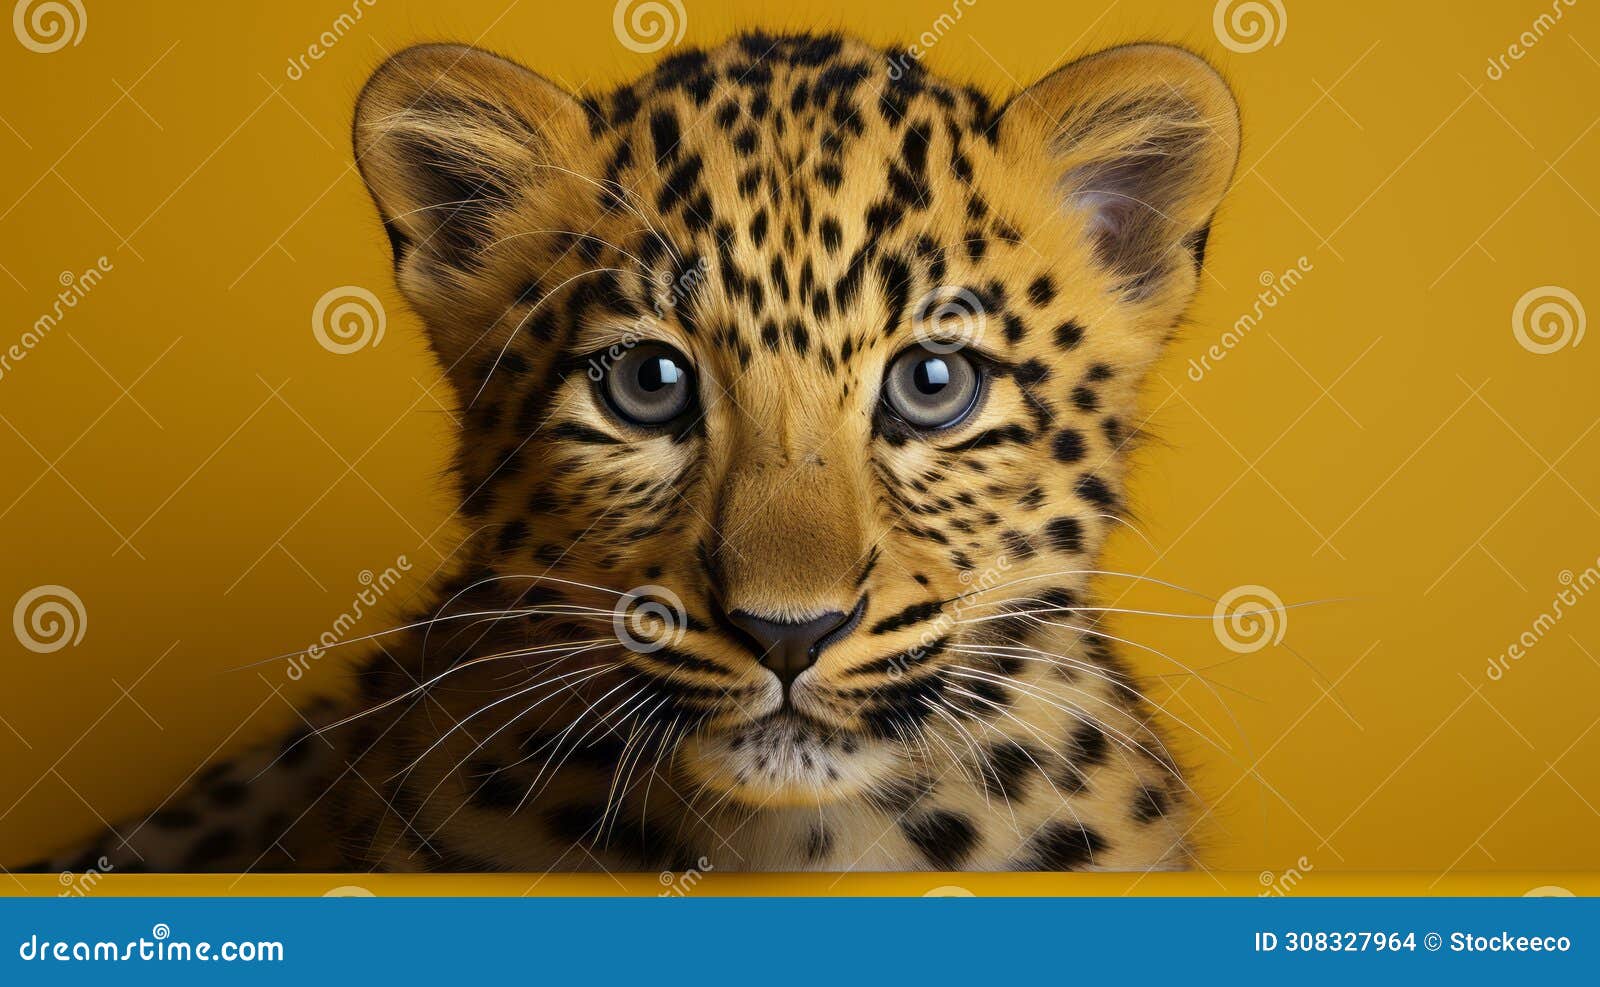 minimalist photography: cute baby leopard in zbrush style